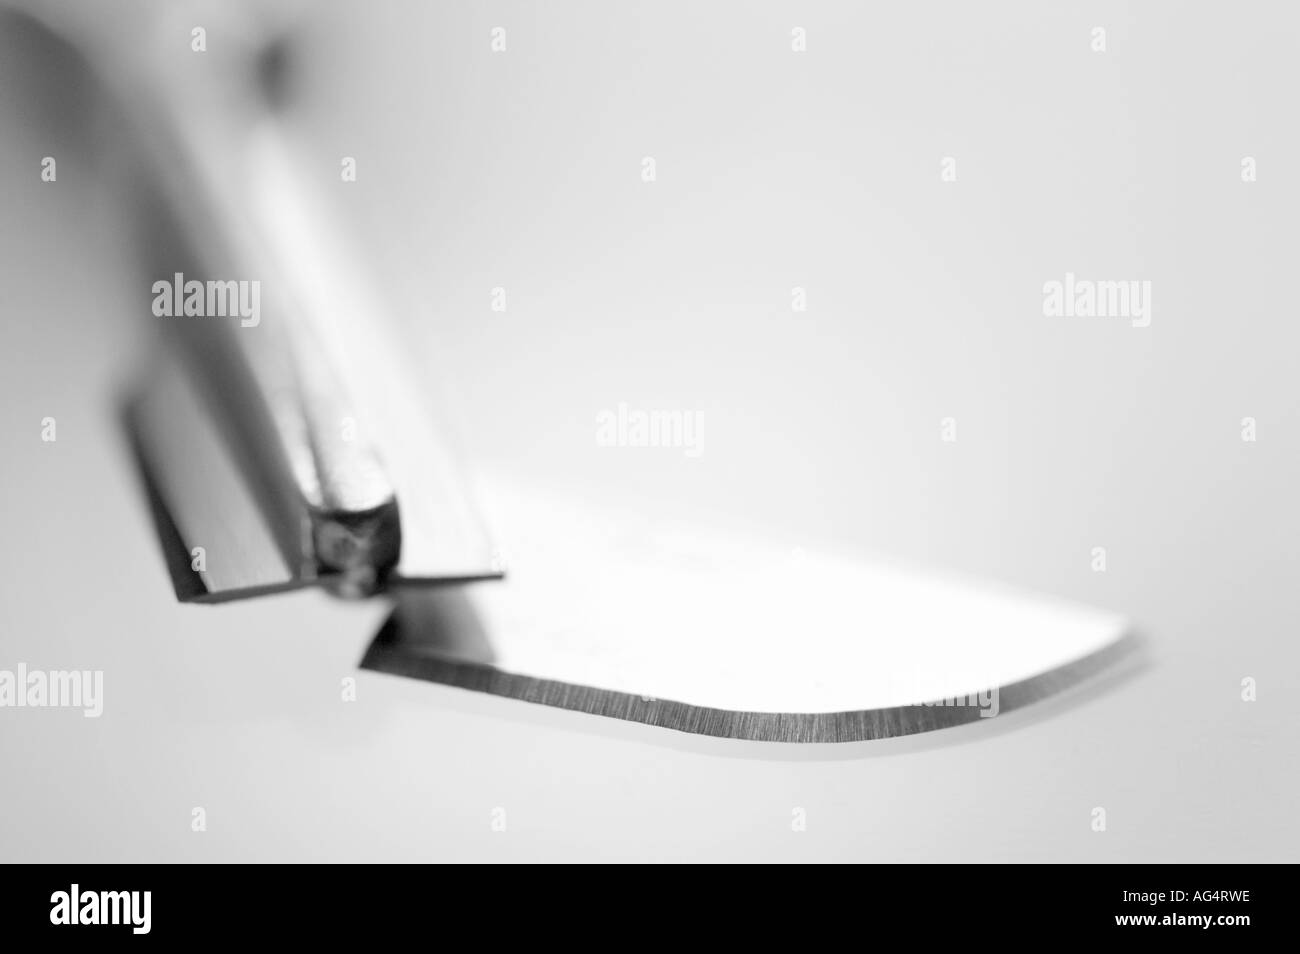 Snapped scalpel blade Stock Photo